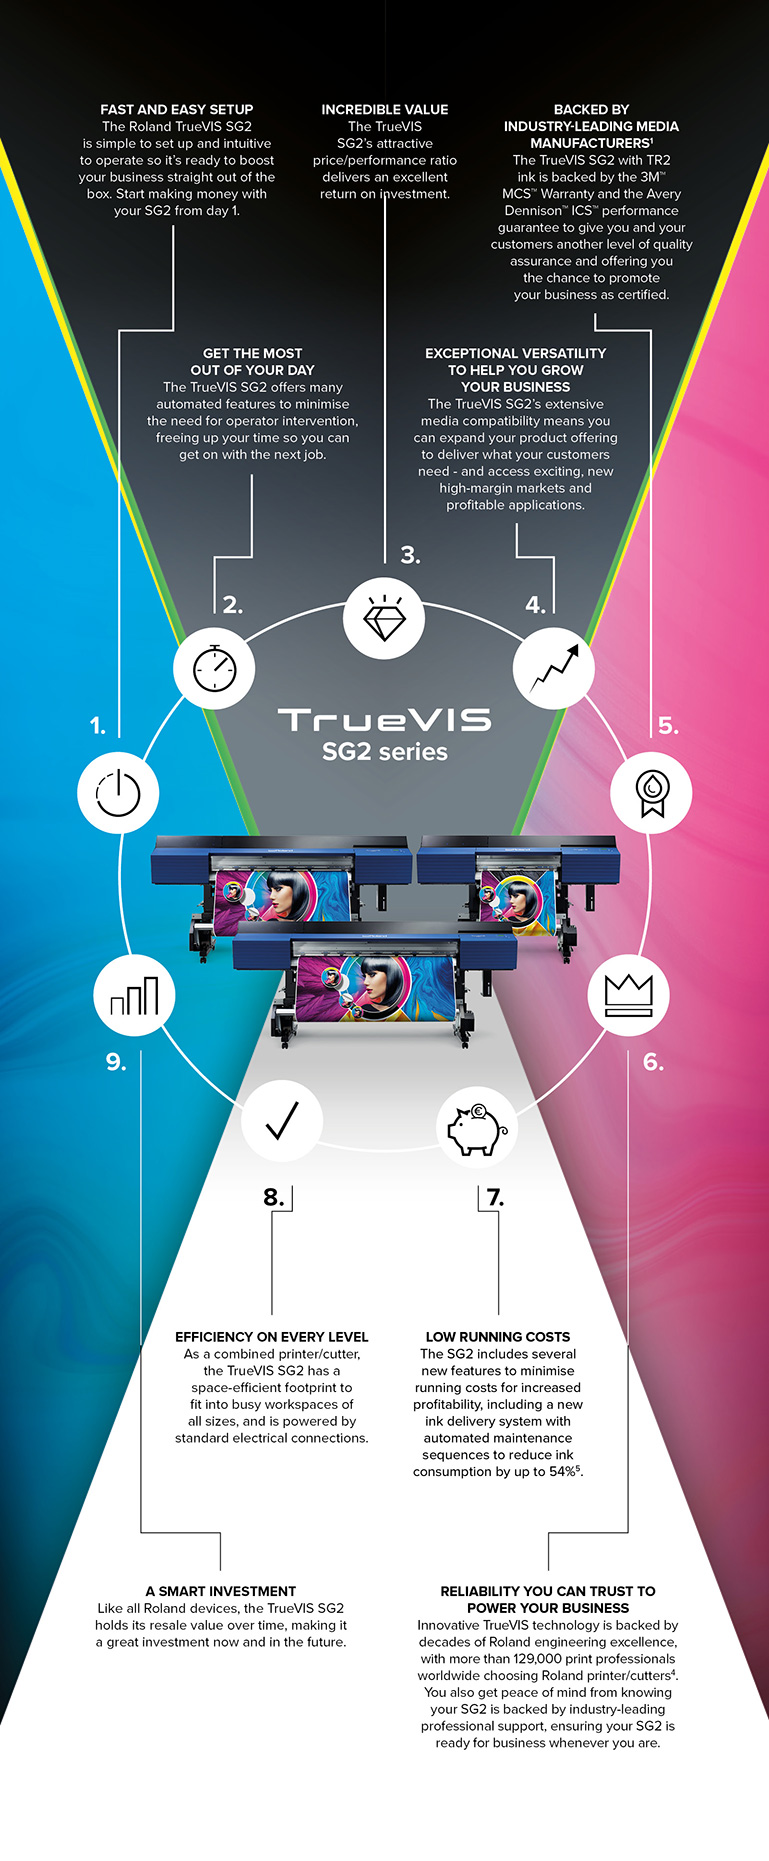 9 reasons why you should choose TrueVIS SG2 for your business